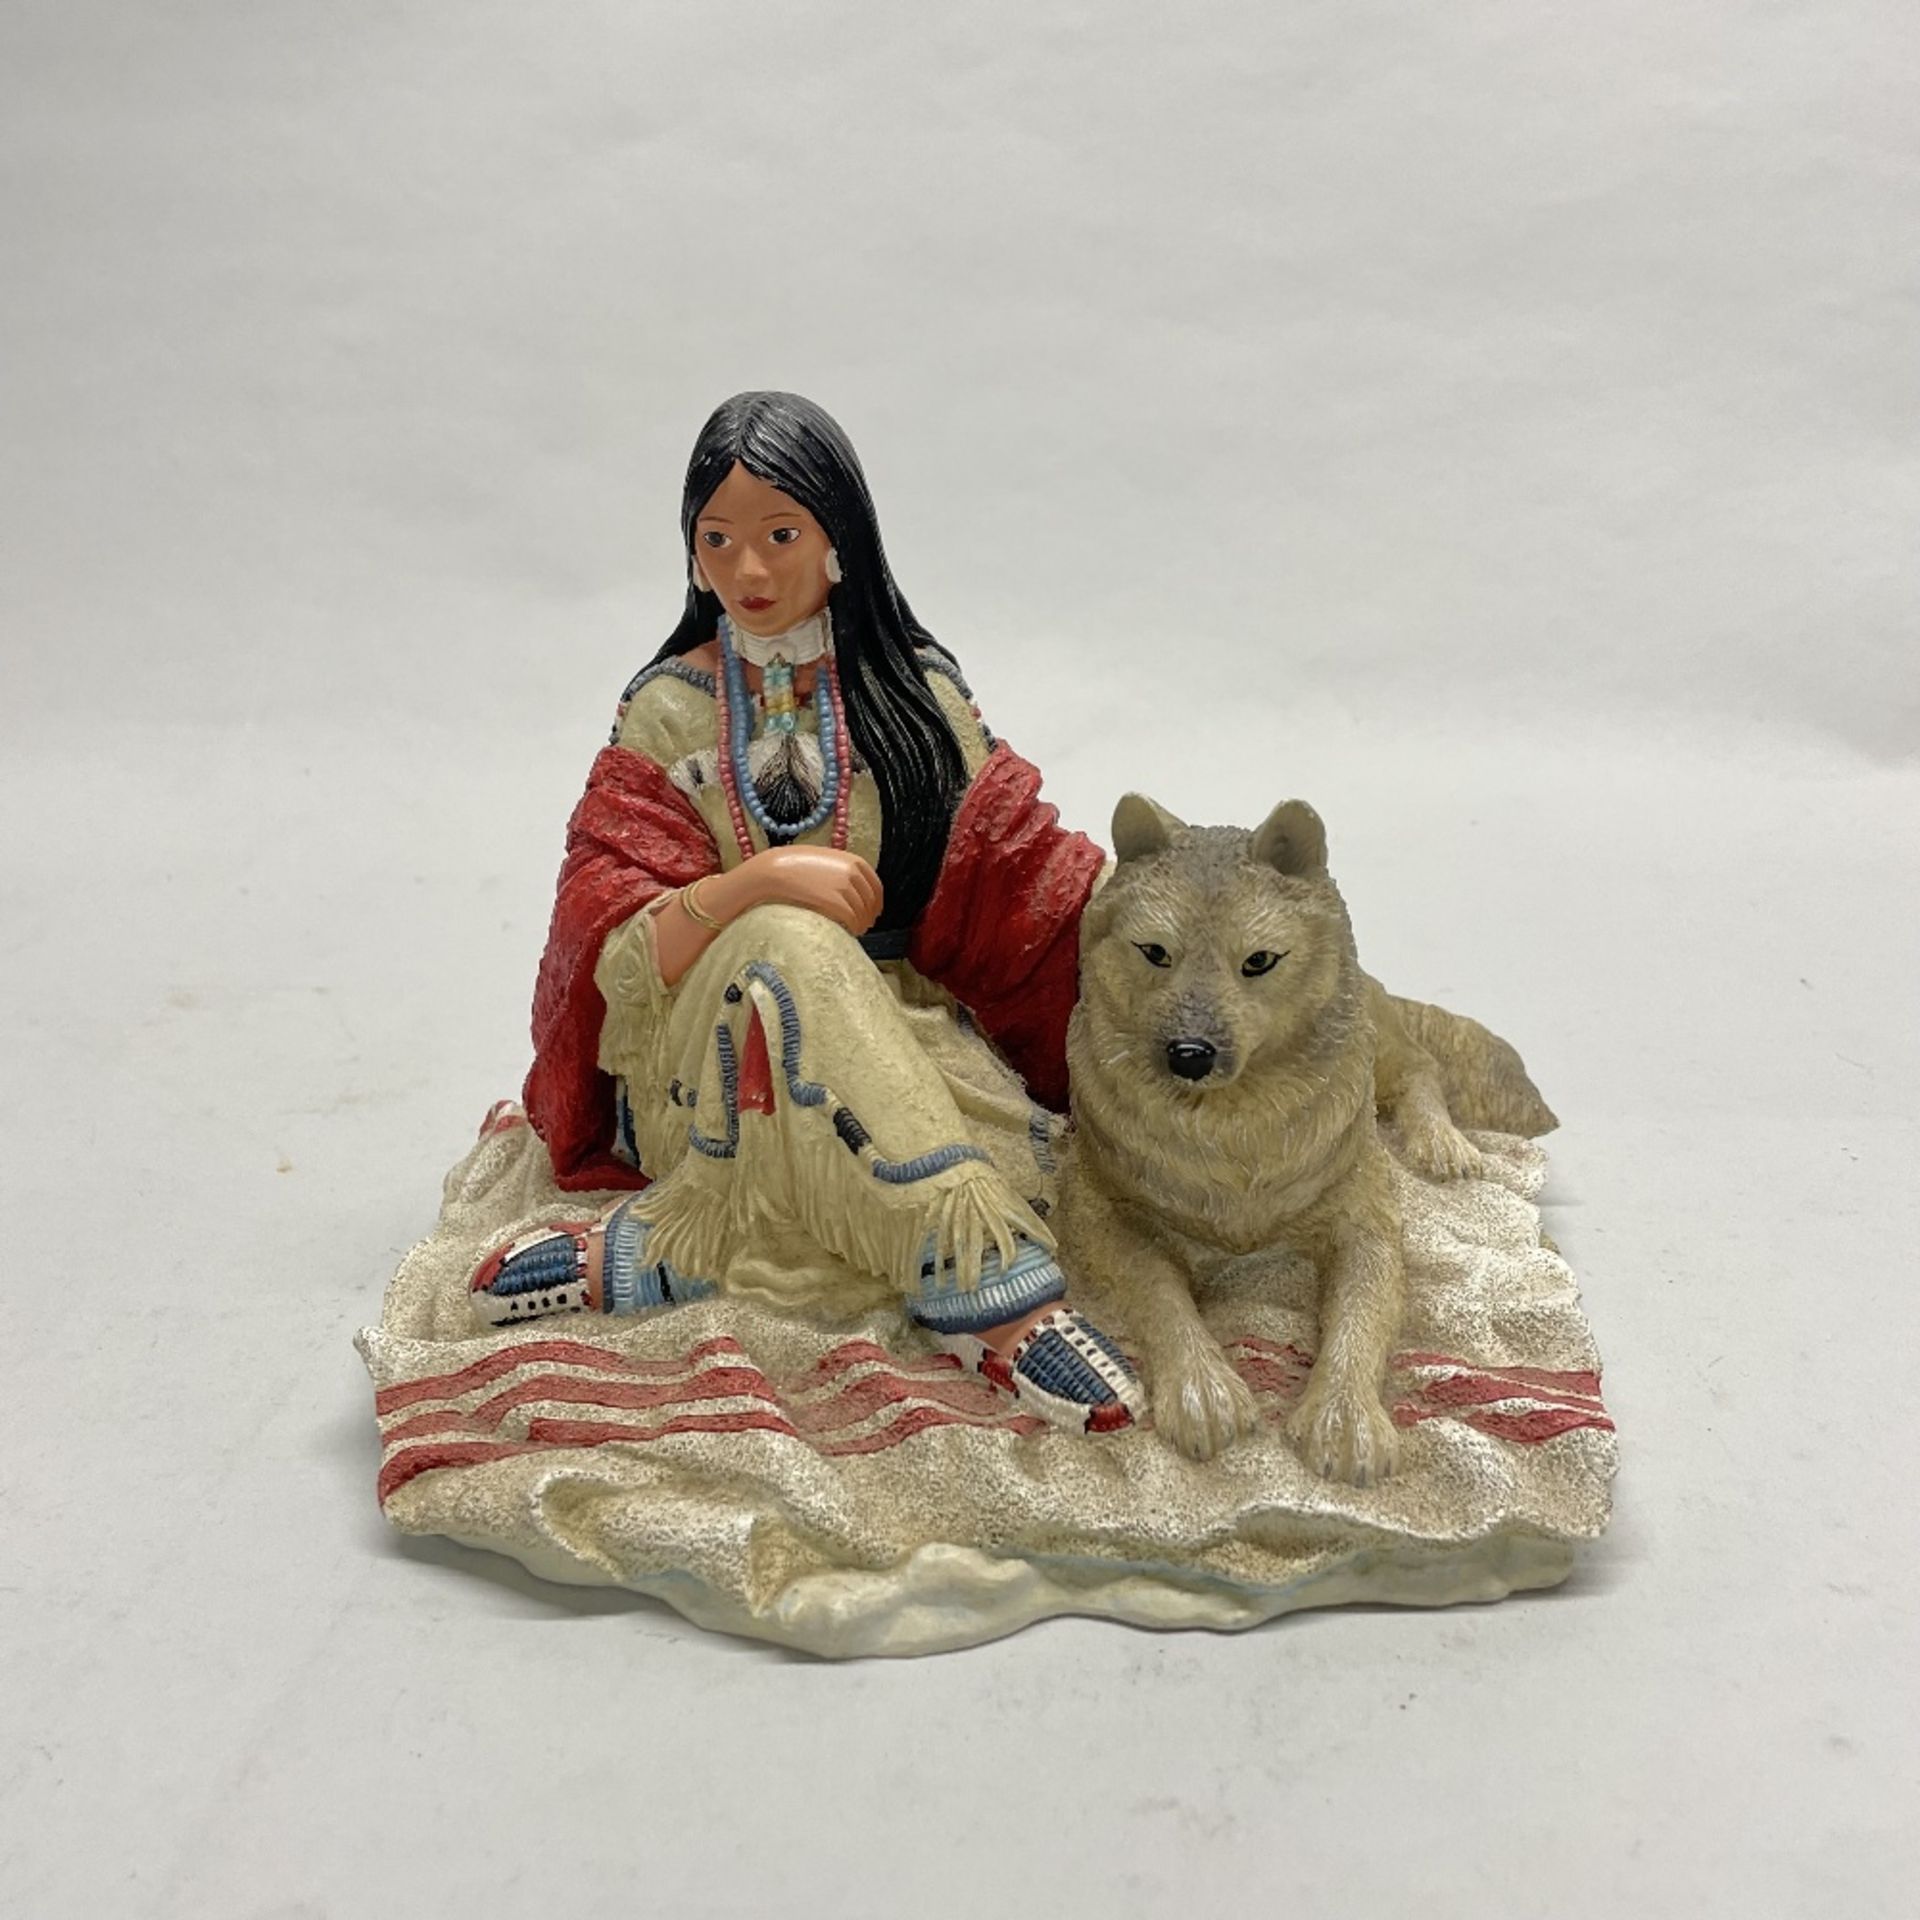 Two Hamilton collection figures of Native American women with animals, H. 15cm. - Image 2 of 6